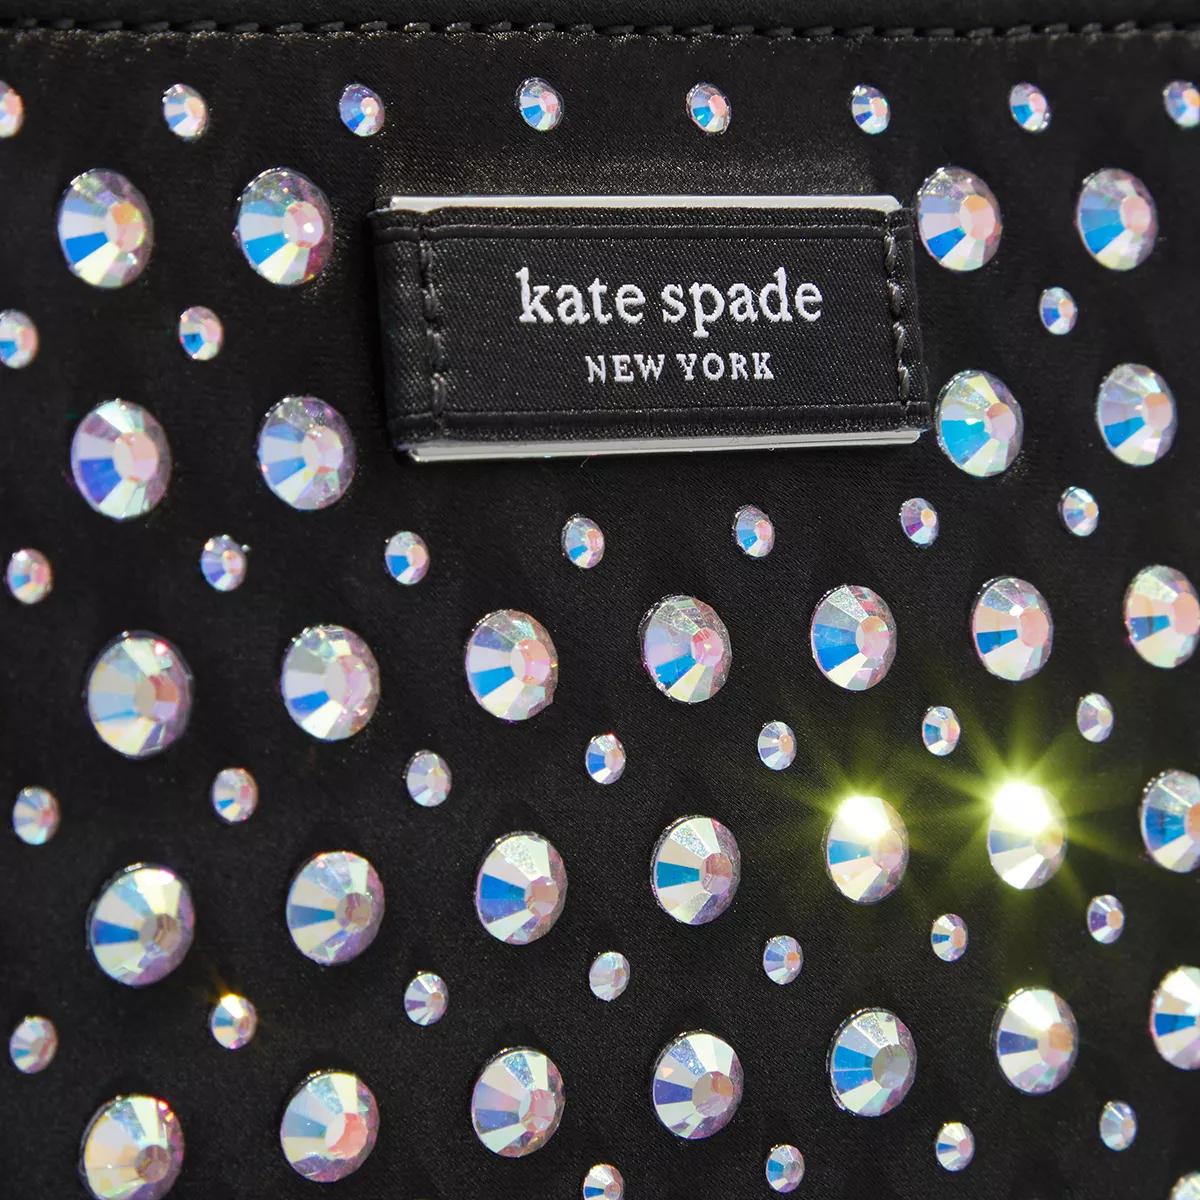 Kate spade new york Totes Sam Icon Crystal Embellished Fabric in zwart